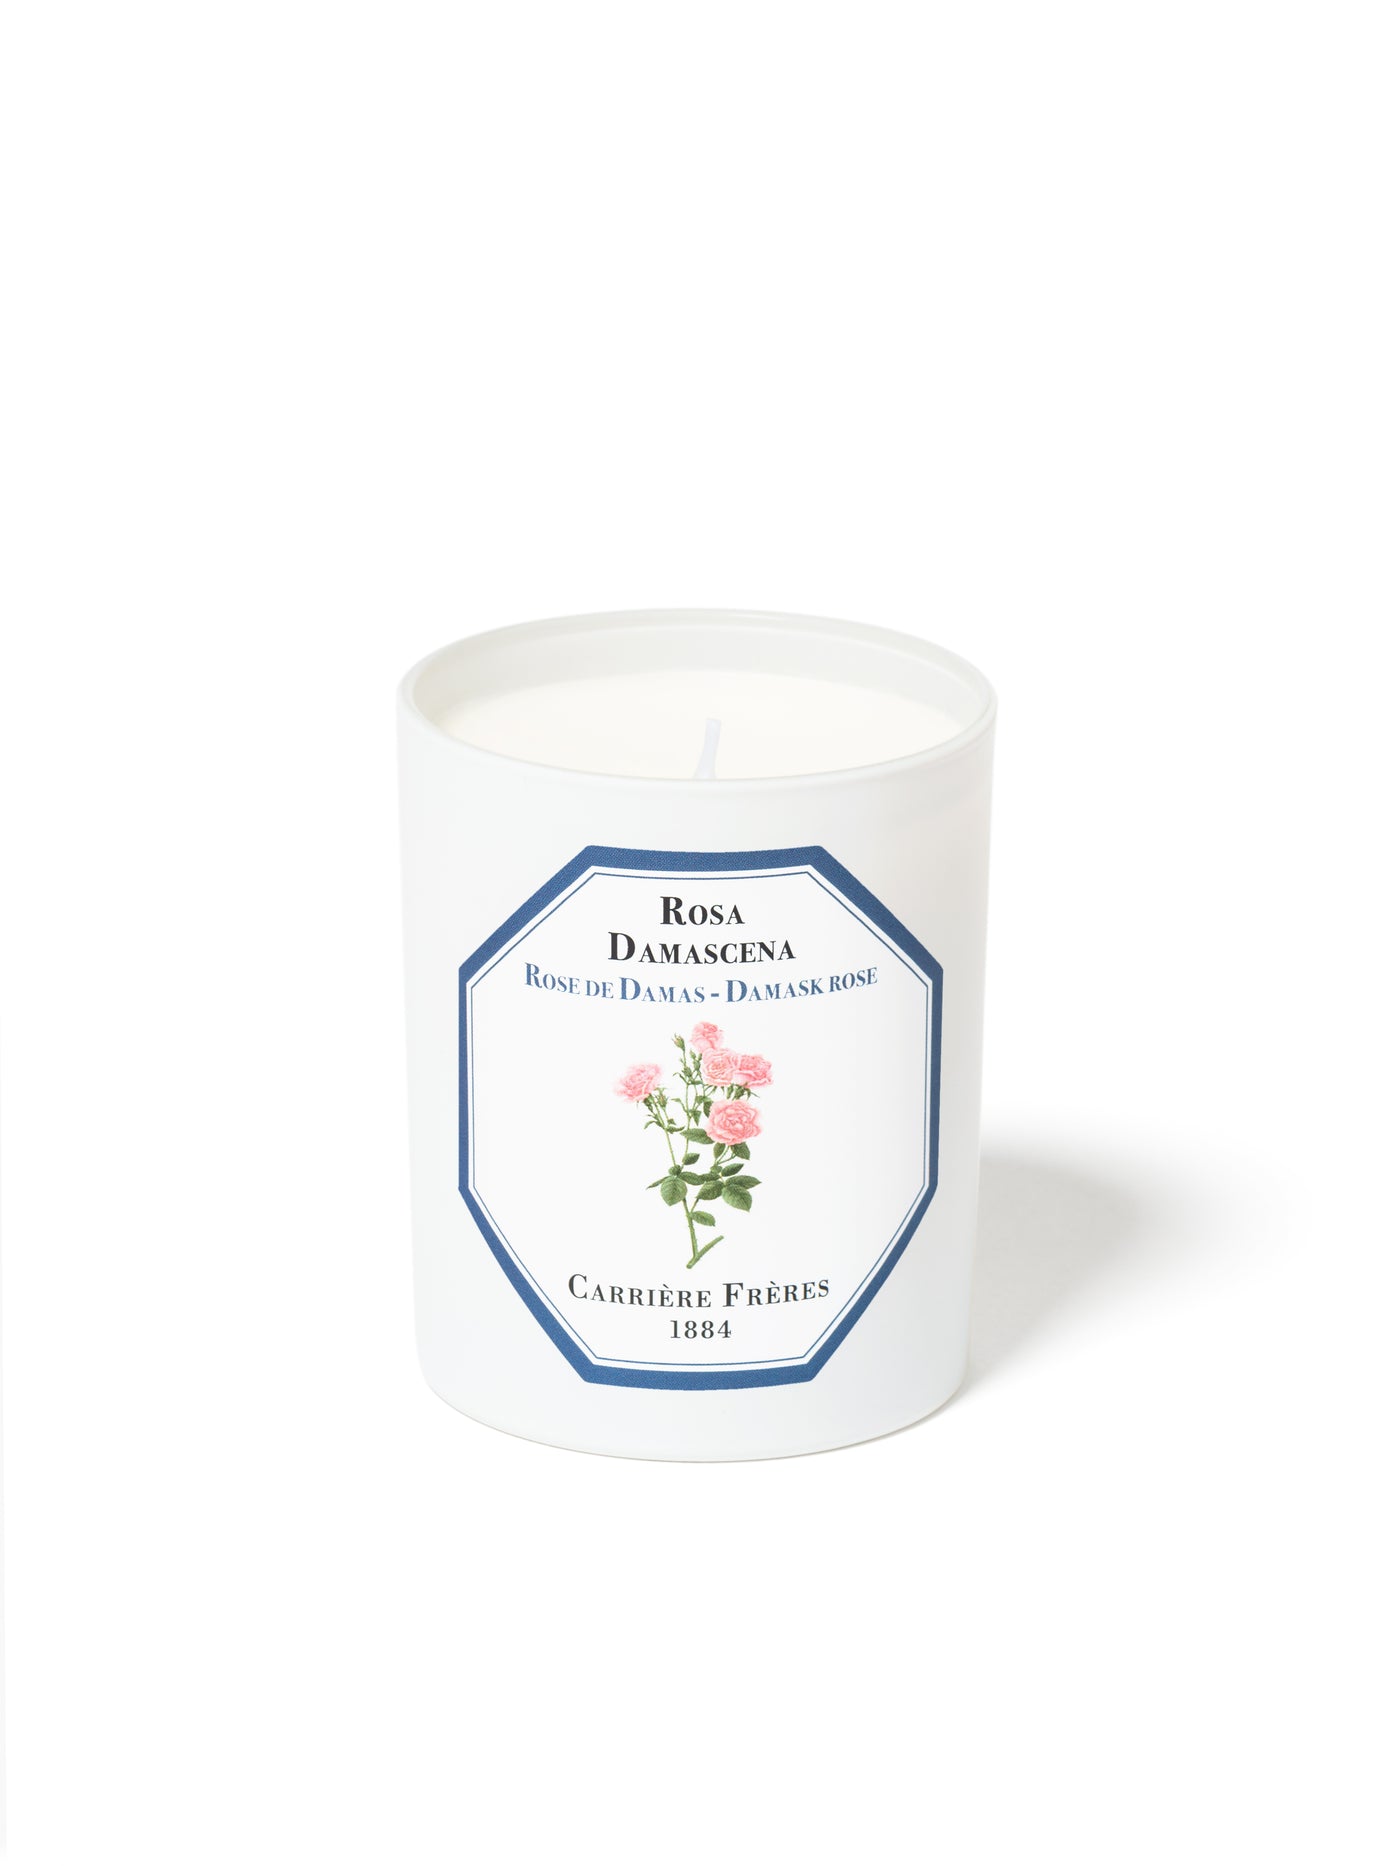 Carriere Freres Scented Damask Rose